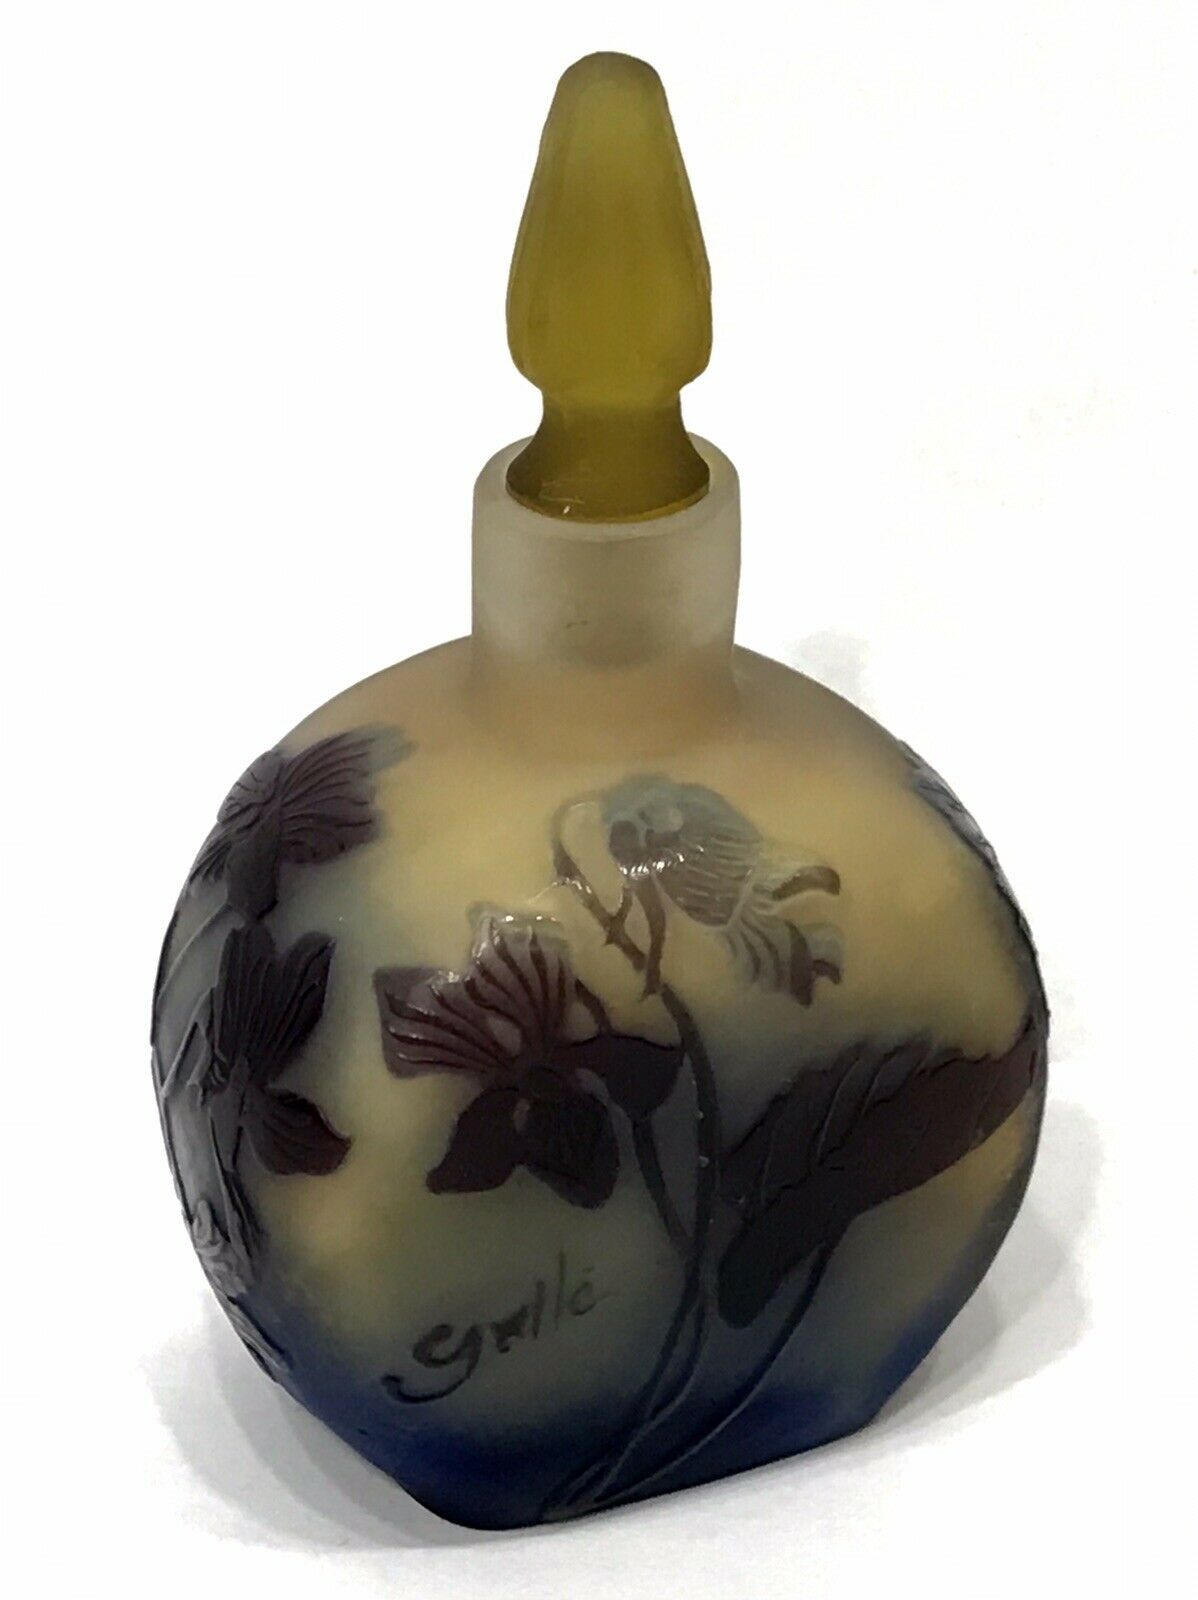 Authentic Antique Emille Galle Cameo Glass Perfume Bottle, Superb!